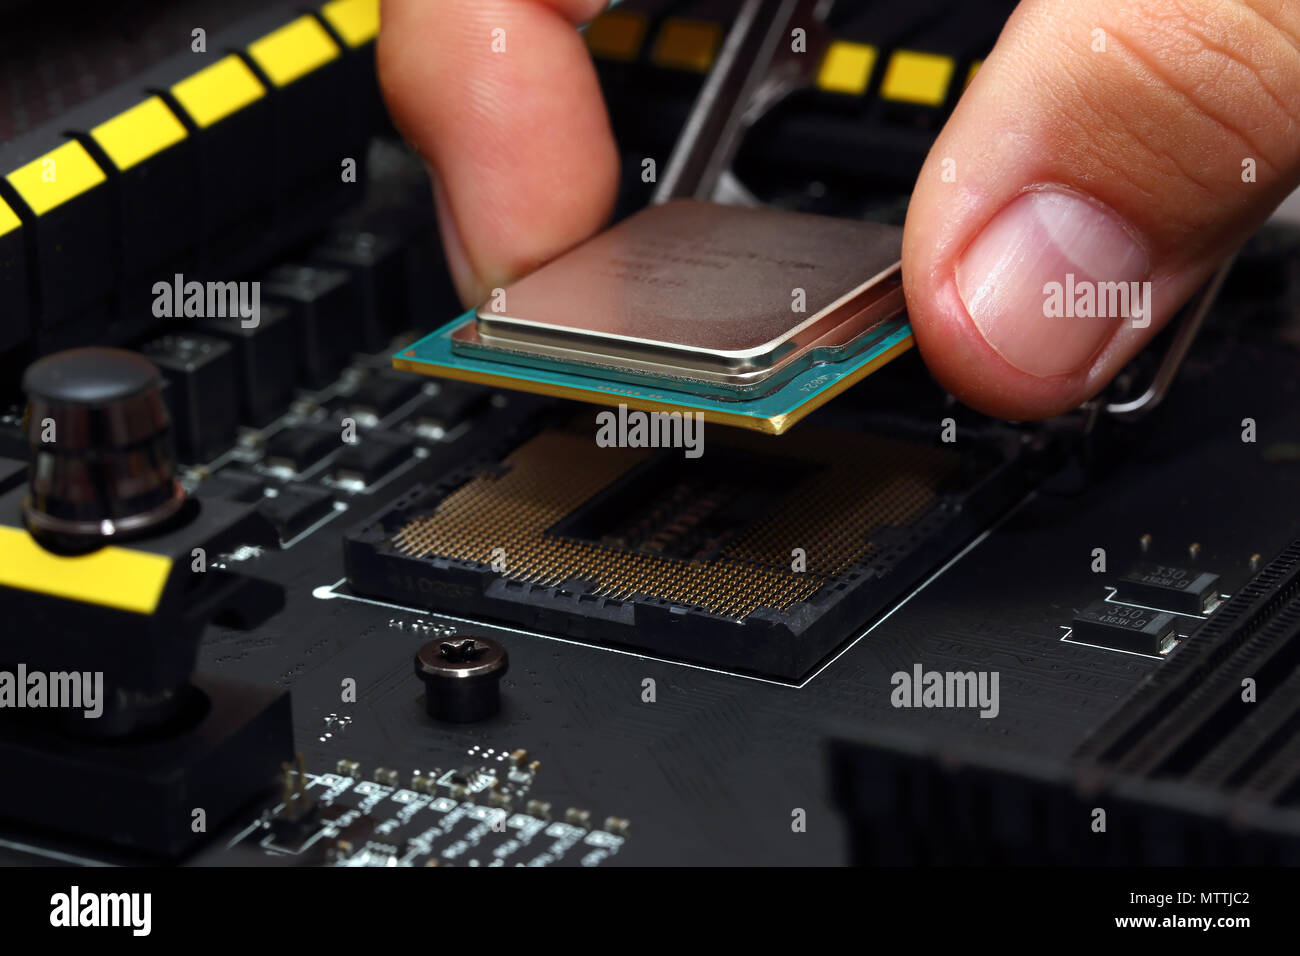 Installing modern central processor unit into motherboard Stock Photo